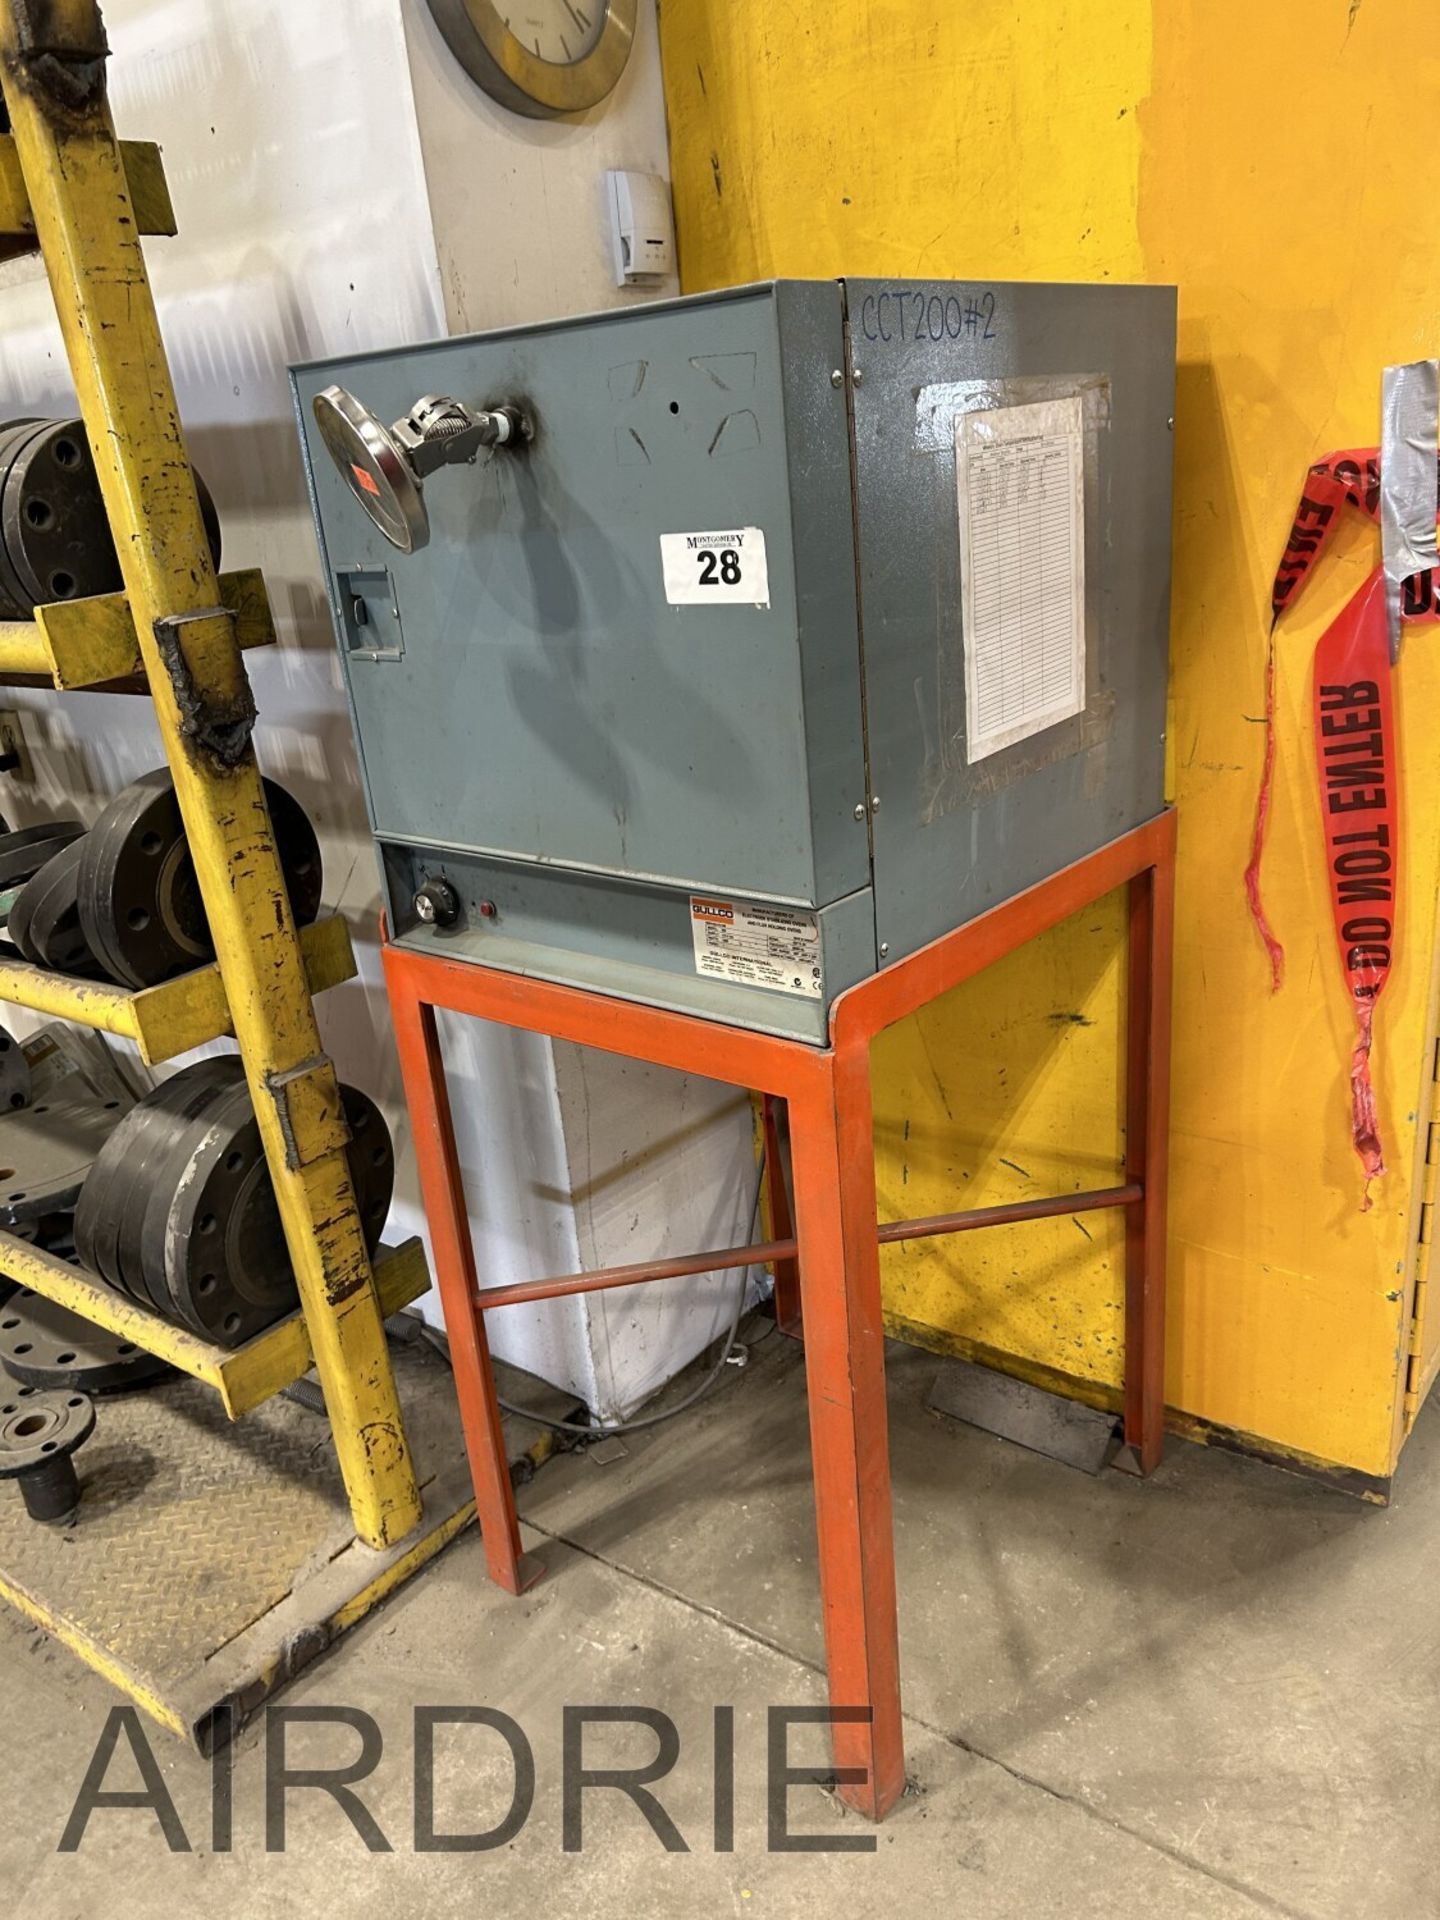 *OFFSITE* GULLCO 350 ELECTRODE STABILIZING OVEN W/ STEEL STAND, S/N 42712-50 (DOES NOT INCLUDE